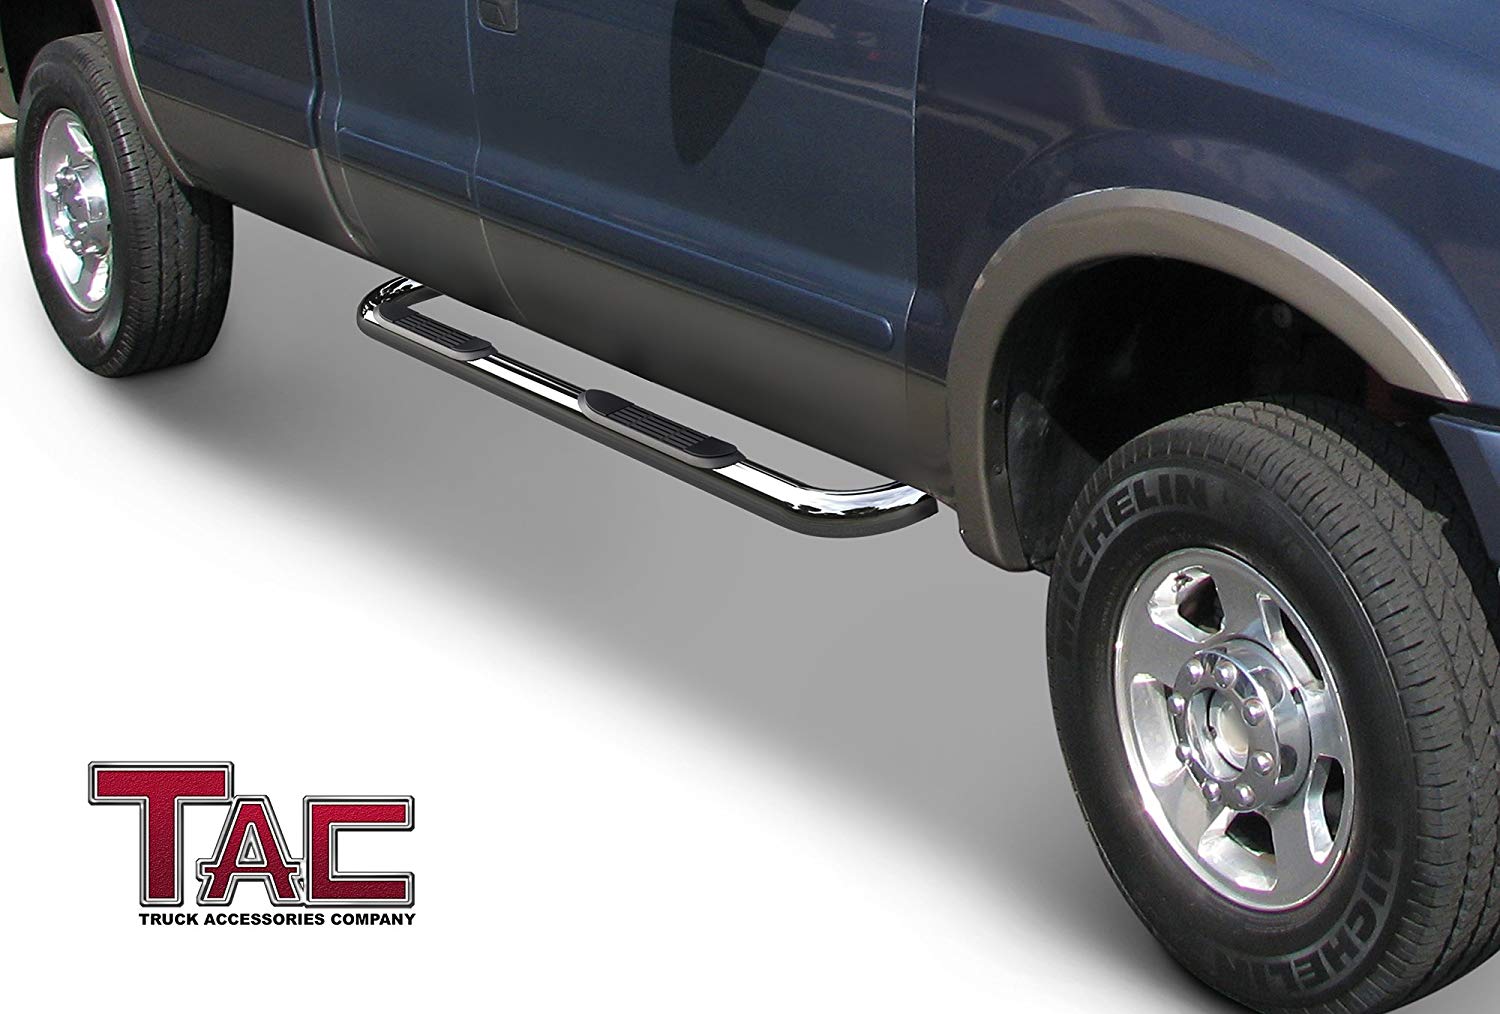 TAC Stainless Steel 3" Side Steps For 1999-2016 Ford F250/350/450/550 Super Duty Super Cab Truck | Running Boards | Nerf Bars | Side Bars - 0